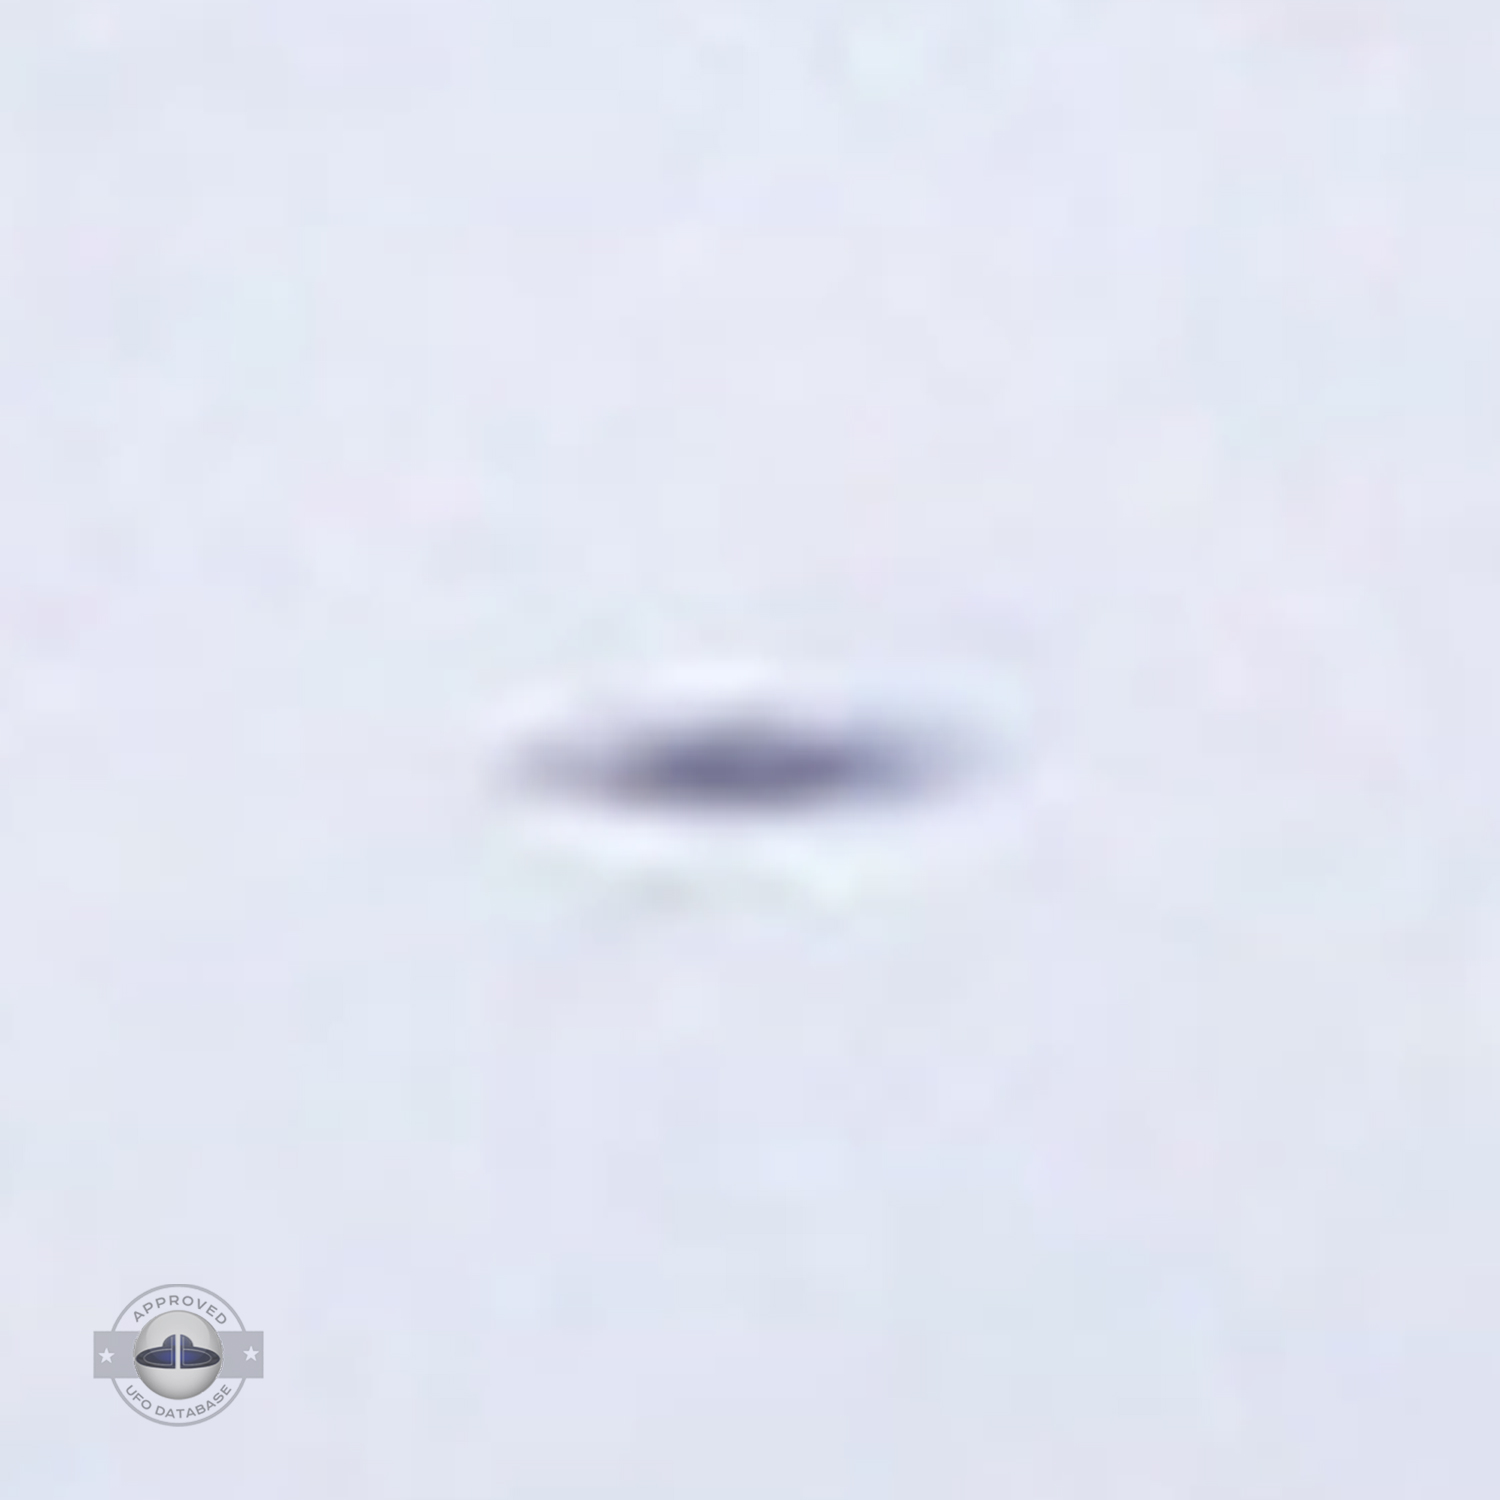 Brazil UFO Sighting | UFO picture captured from bedroom window | 2011 UFO Picture #169-6